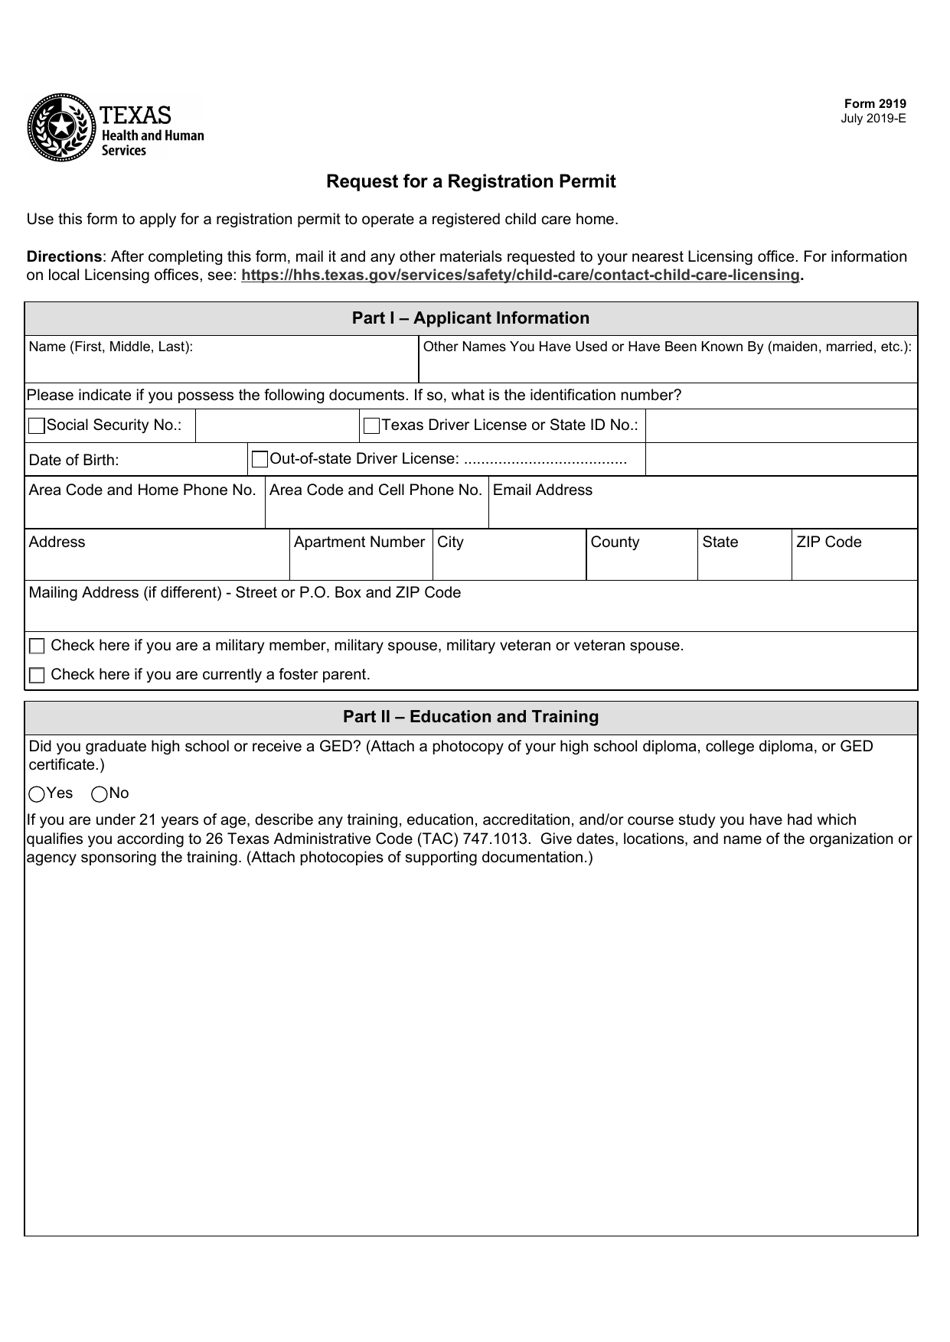 Form 2919 Request for a Registration Permit - Texas, Page 1